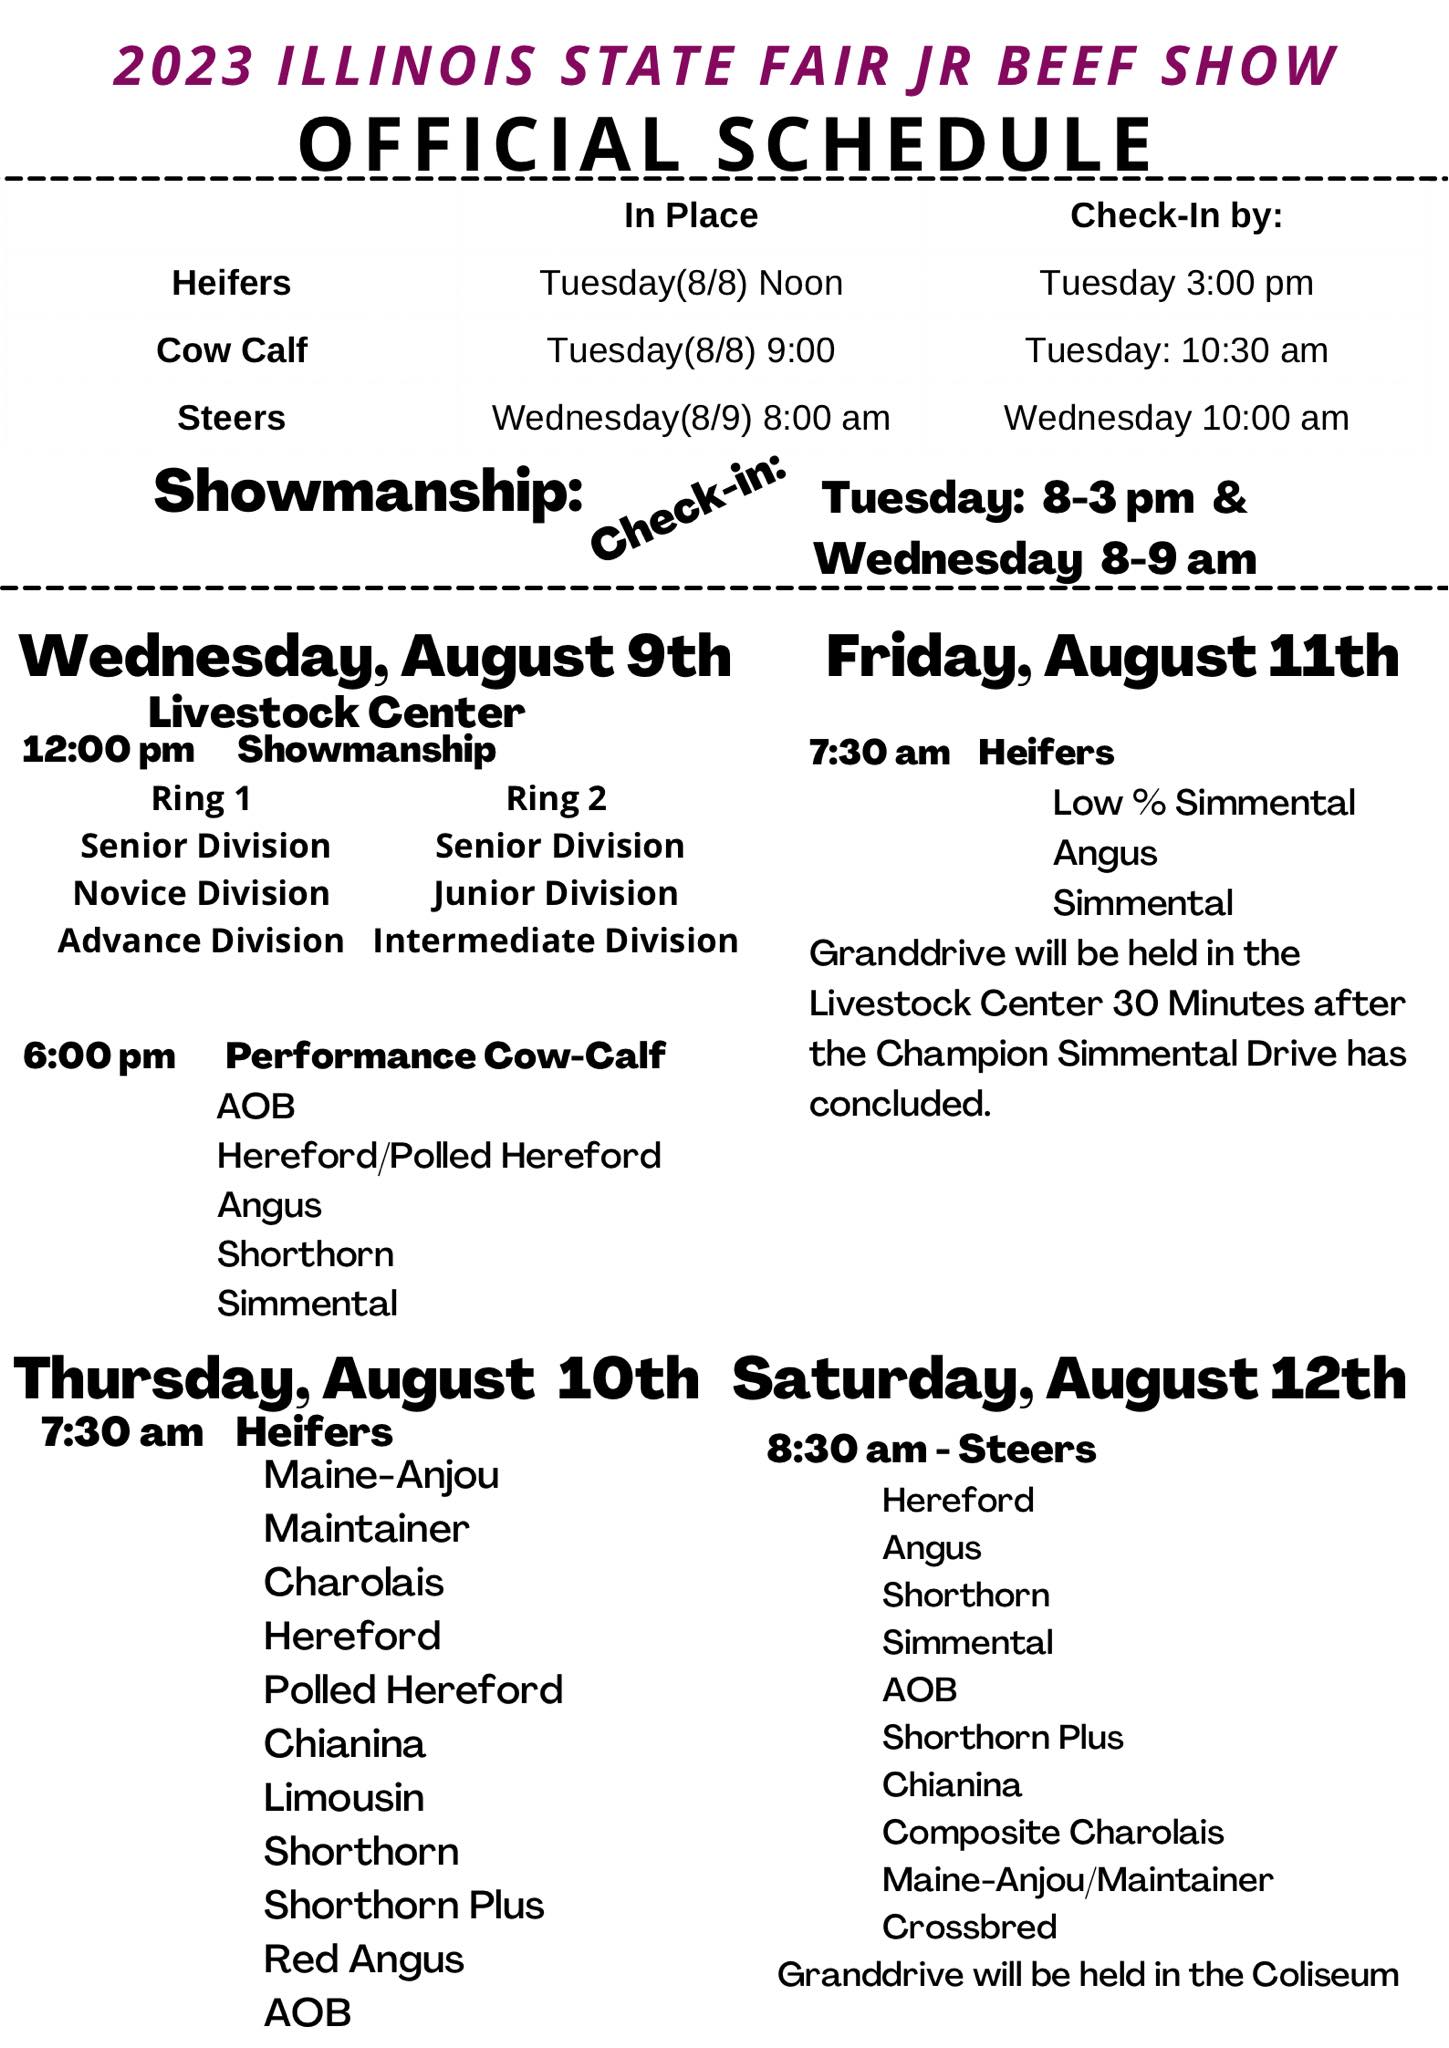 2023 Illinois State Fair Jr. Beef Show Schedule The Pulse